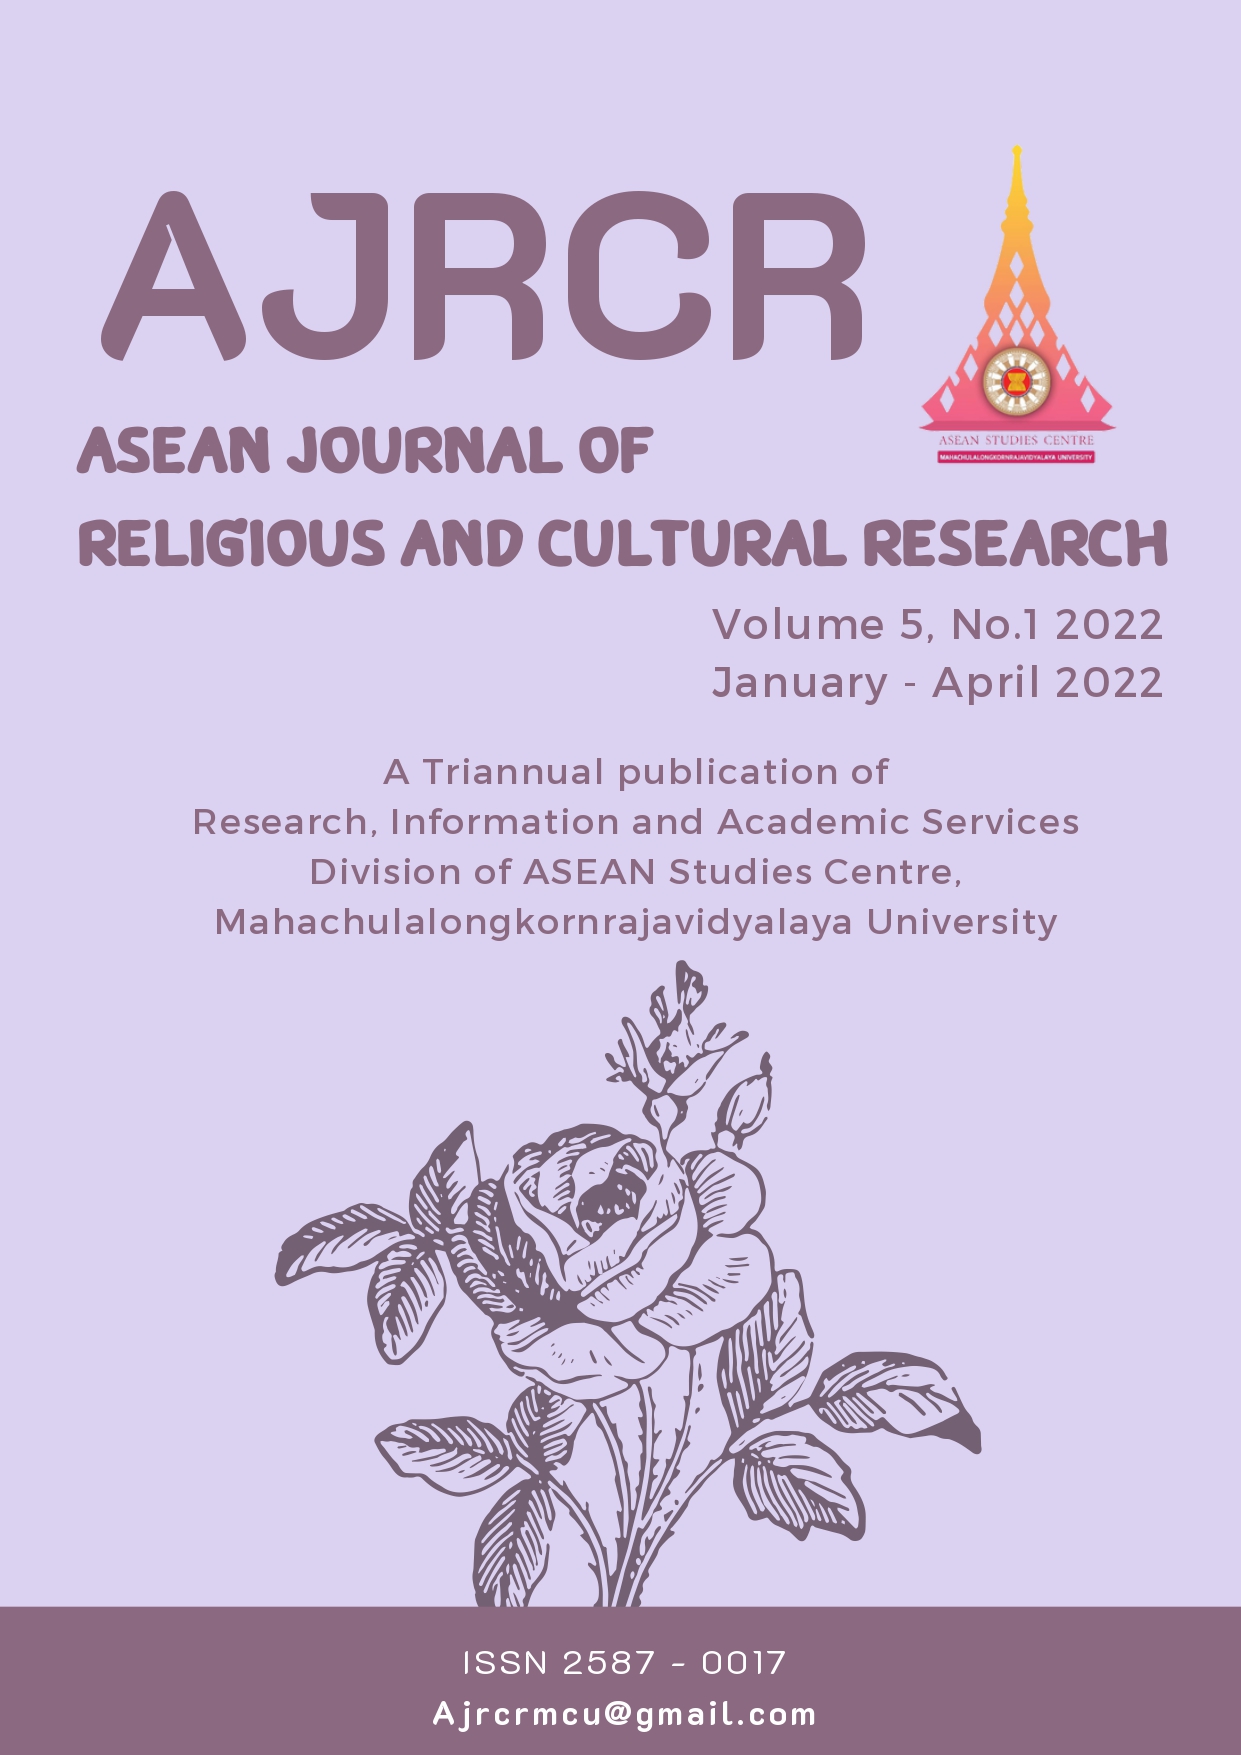 					View Vol. 5 No. 1 (2022): ASEAN Journal of Religious and Cultural Research (AJRCR)
				